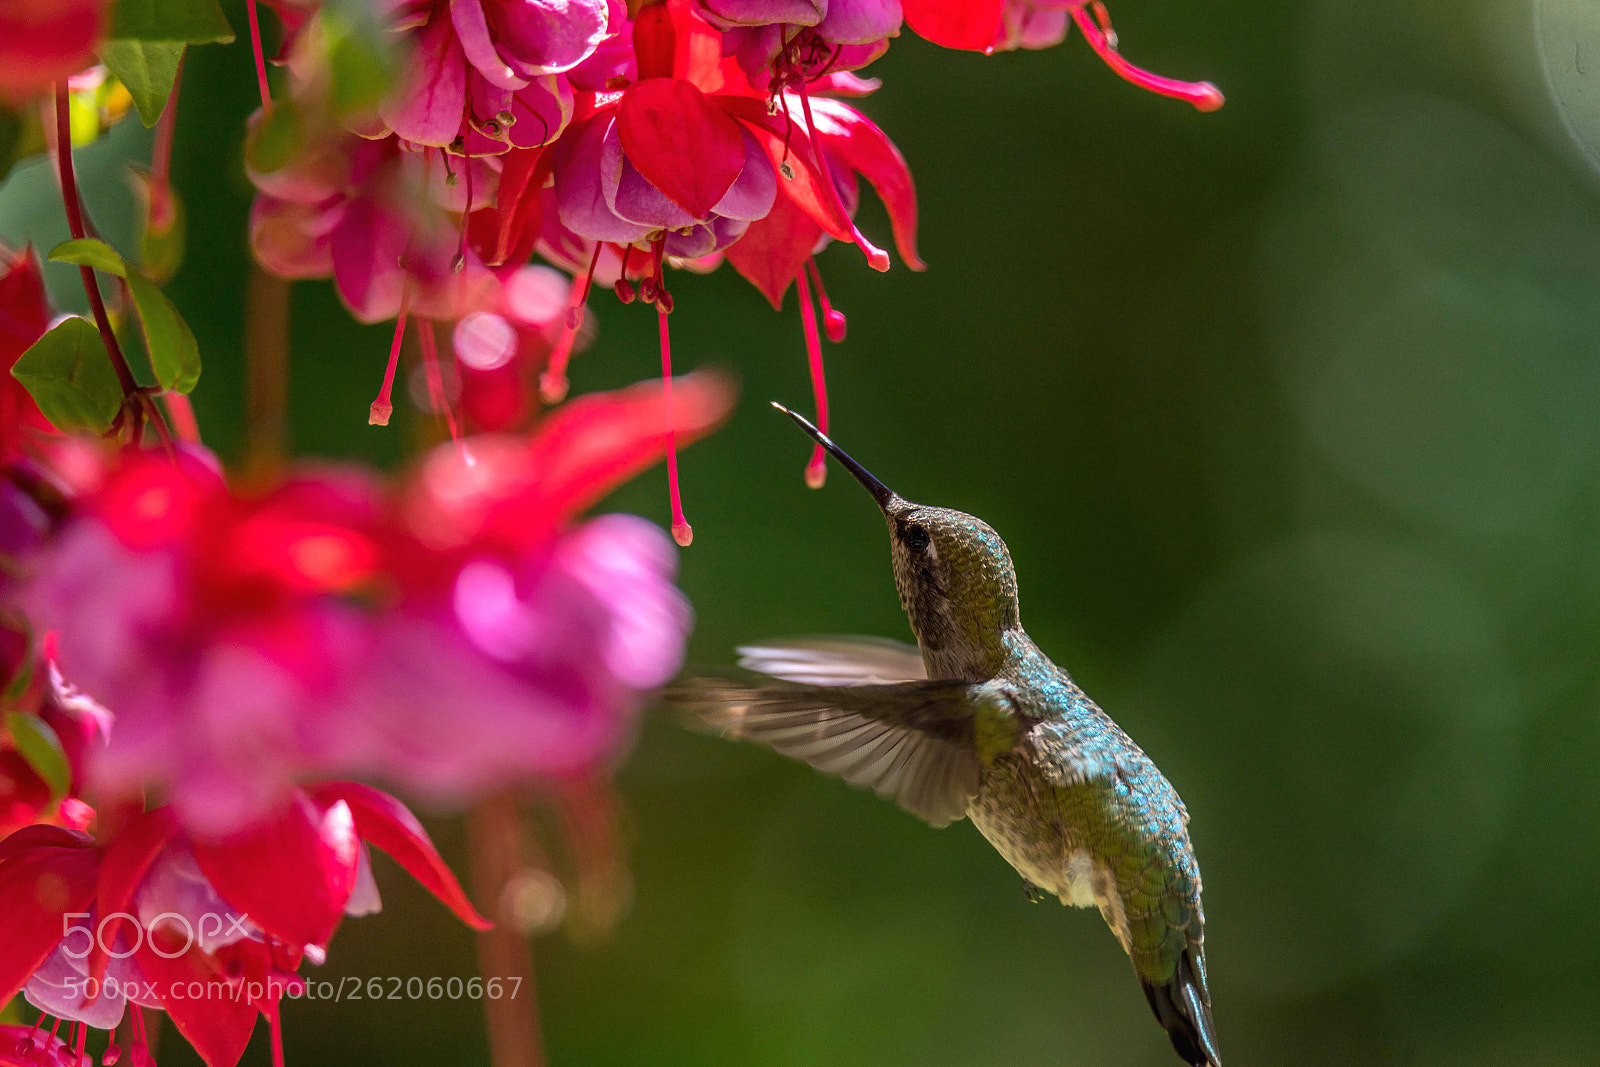 Sony a7 sample photo. Hummingbird and flowers photography